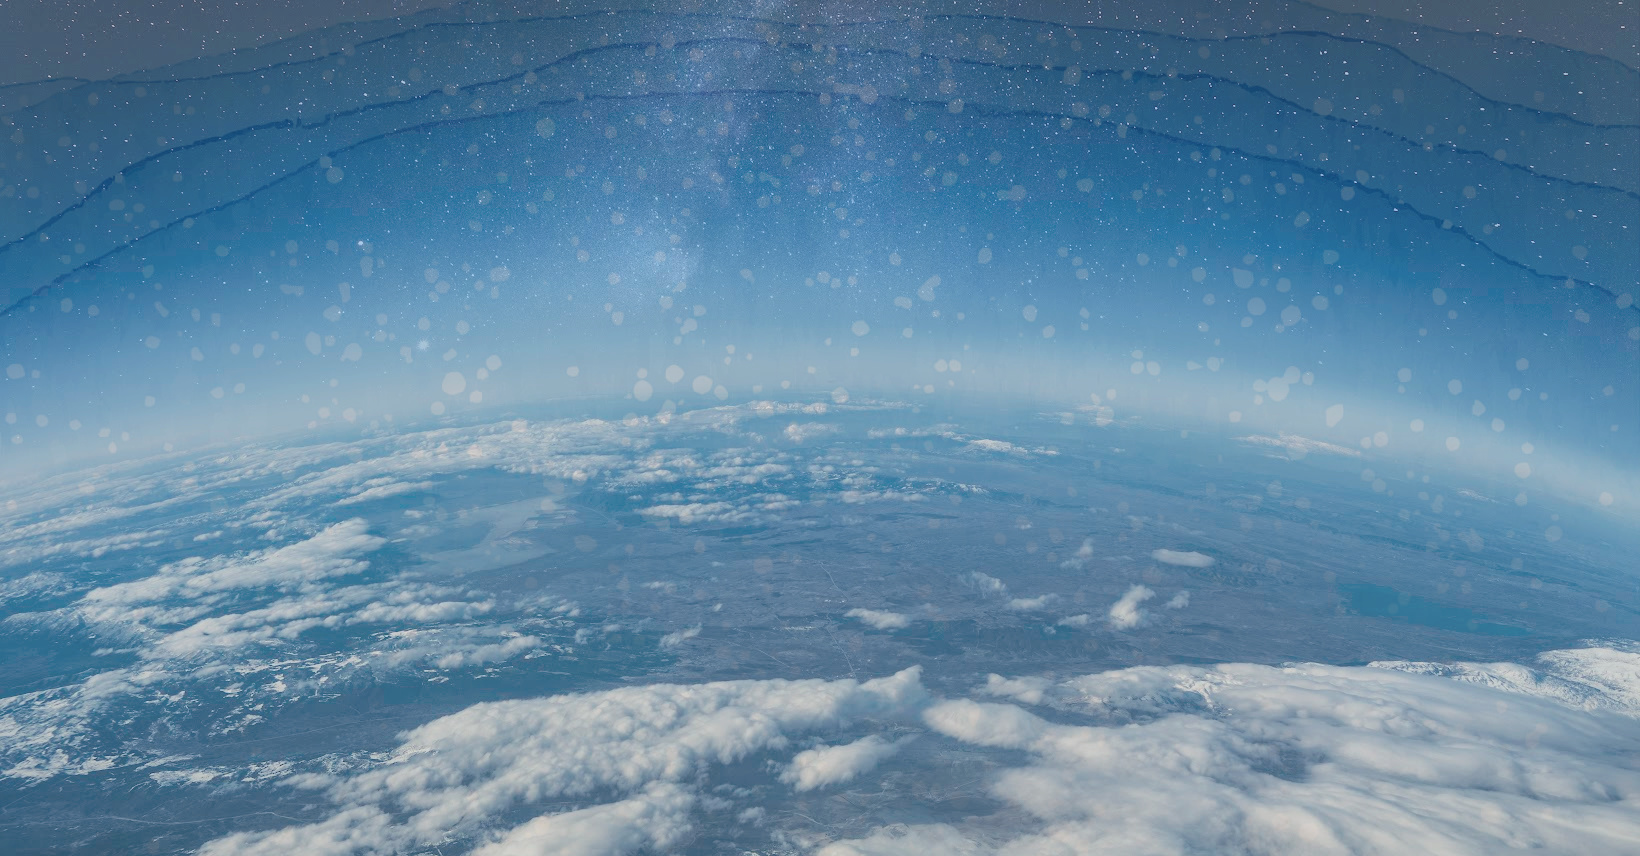 The Earth and clouds pictured in space